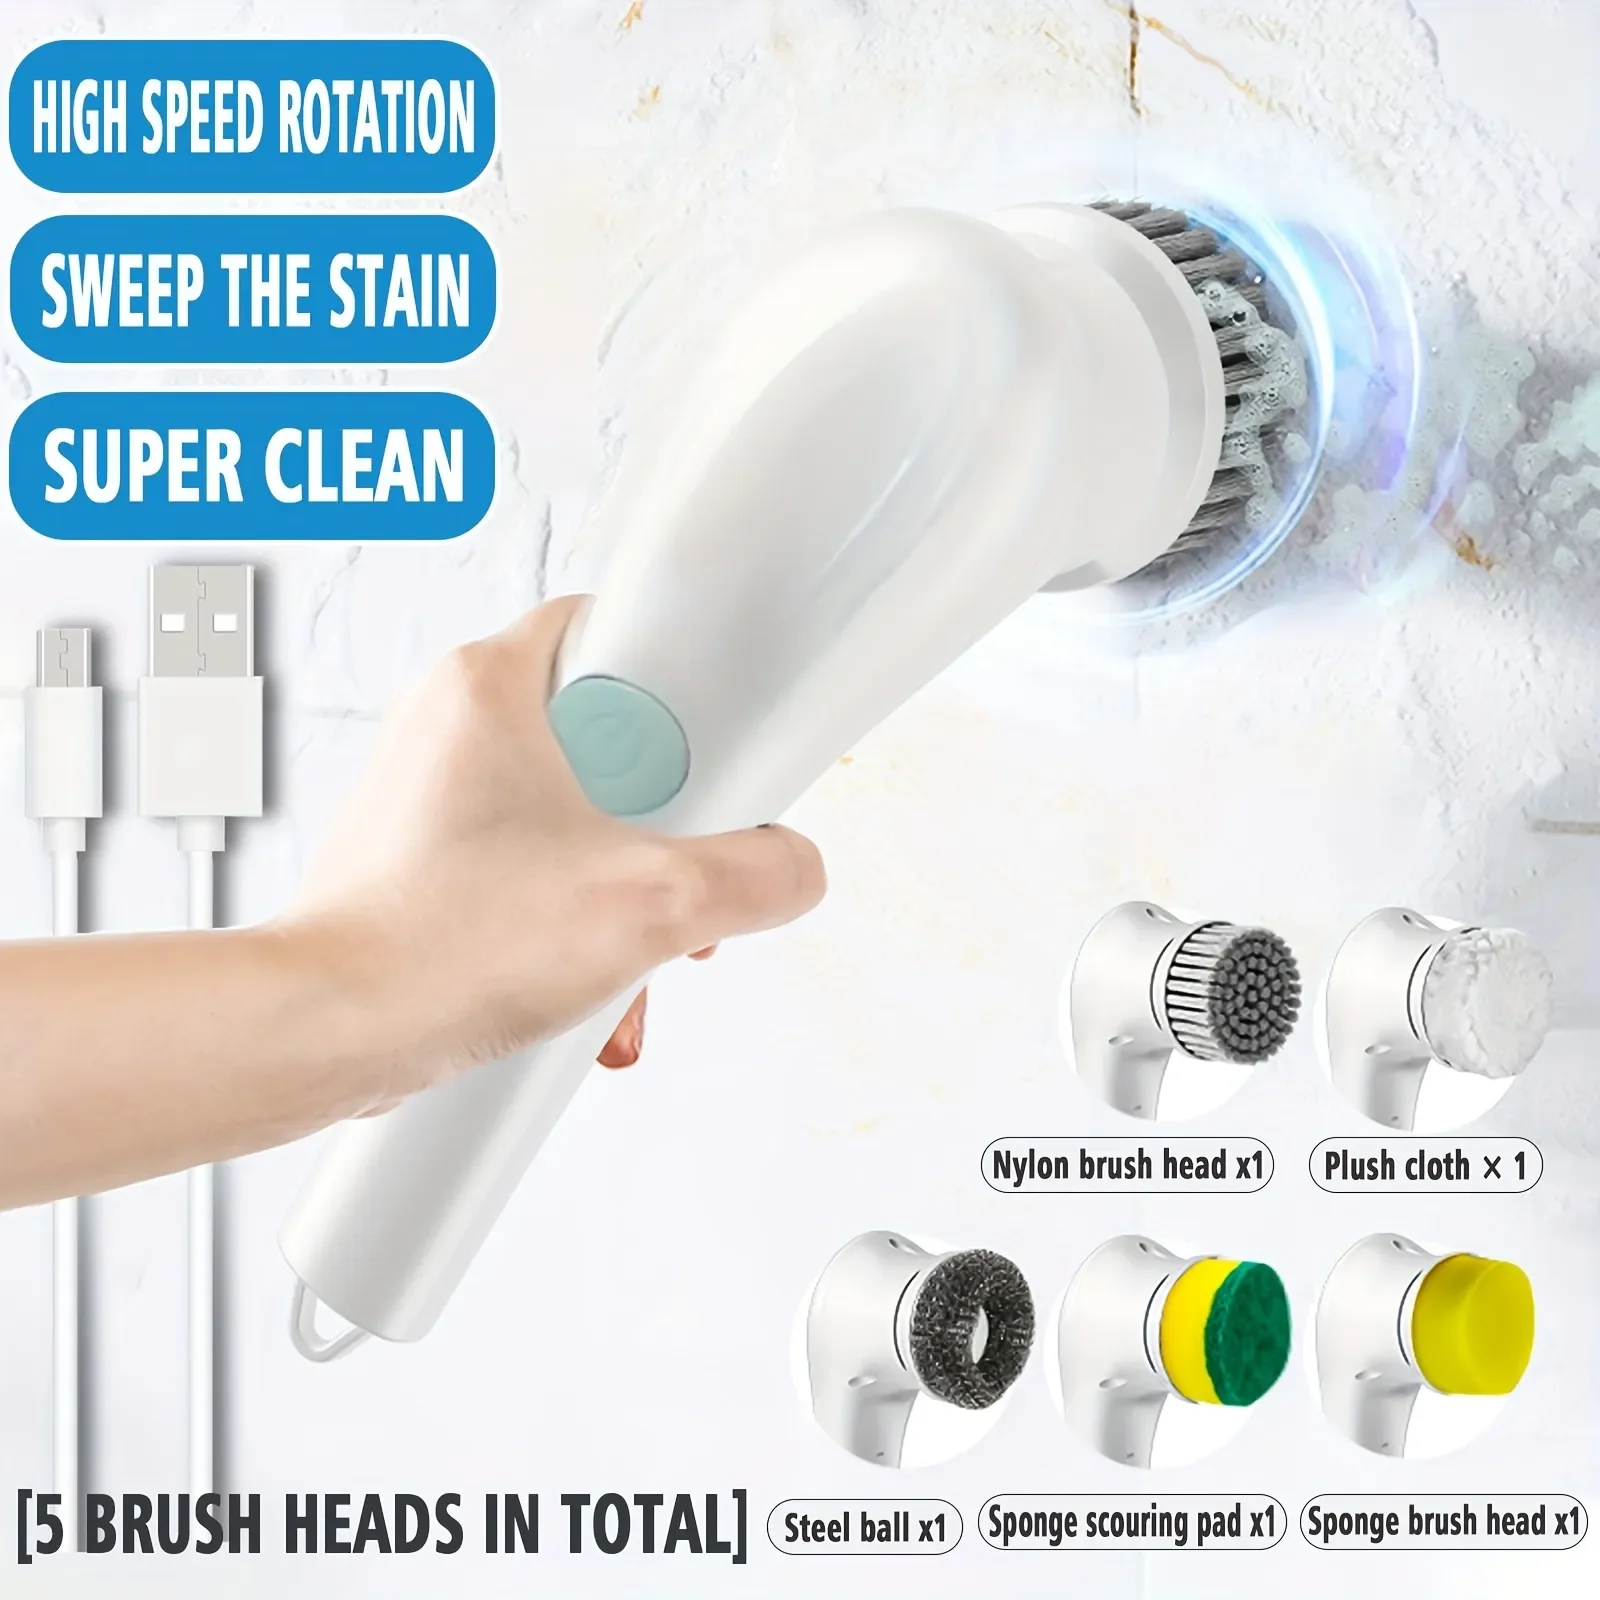 5-in-1Multifunctional Electric Cleaning Brush usb charging Bathroom Wash Brush Kitchen Cleaning Tool Dishwashing Brush kitchen cleaning brush straw dishwashing brush household pan brush kitchen artifact sink cleaning brush cup brush